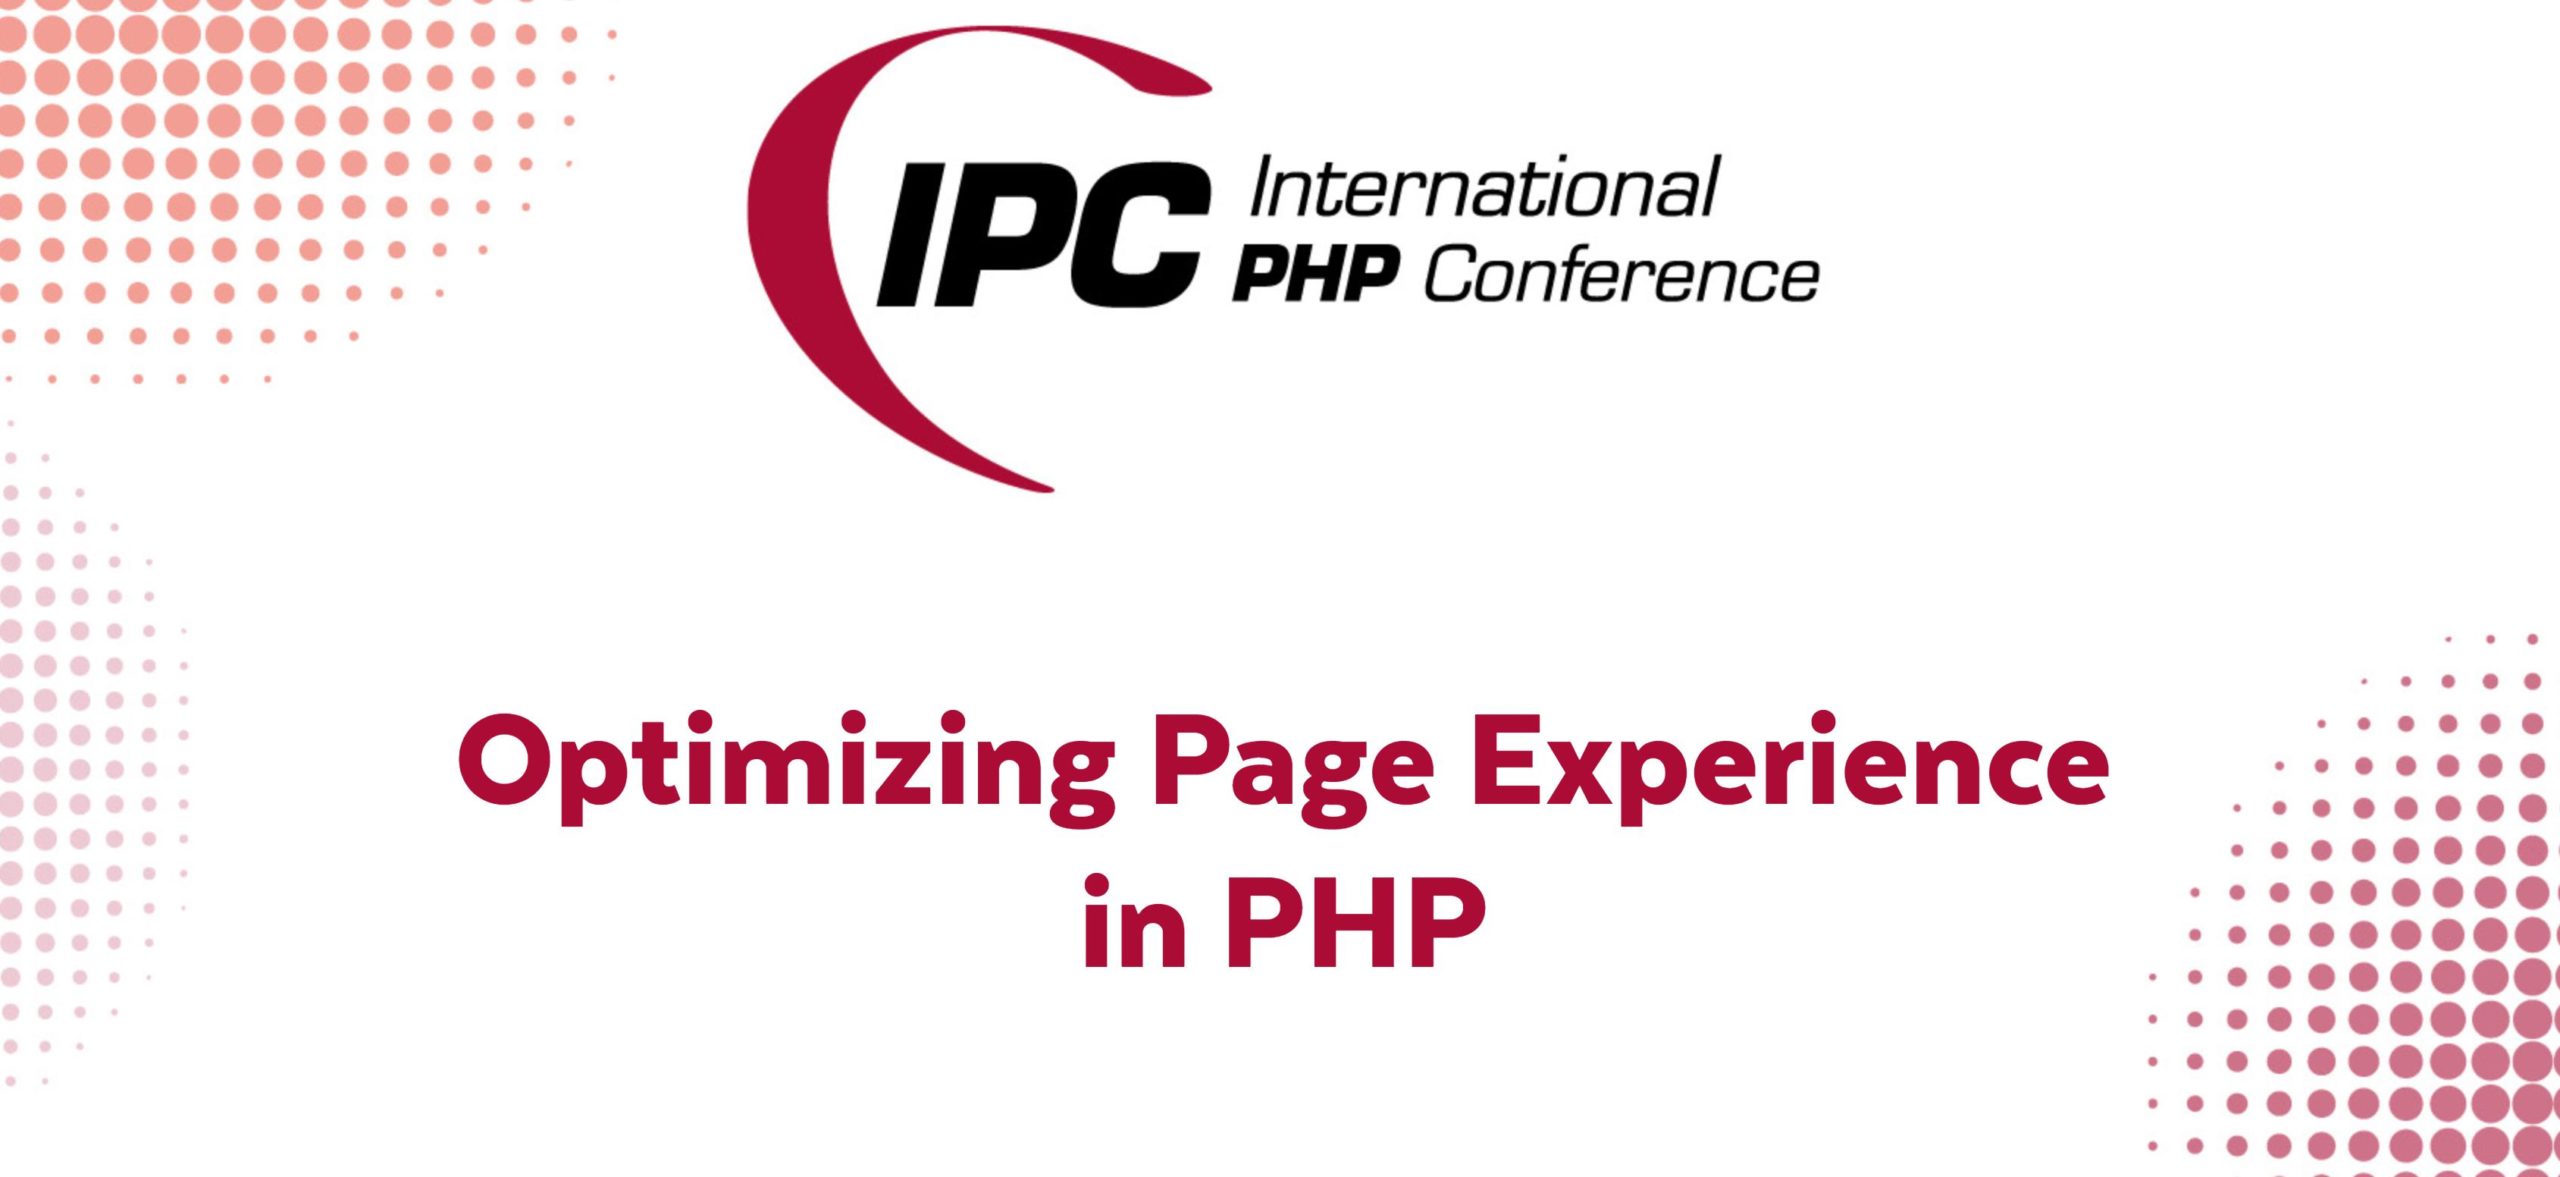 Title slide for the talk "Optimizing Page Experience in PHP" for IPC 2021 in Munich